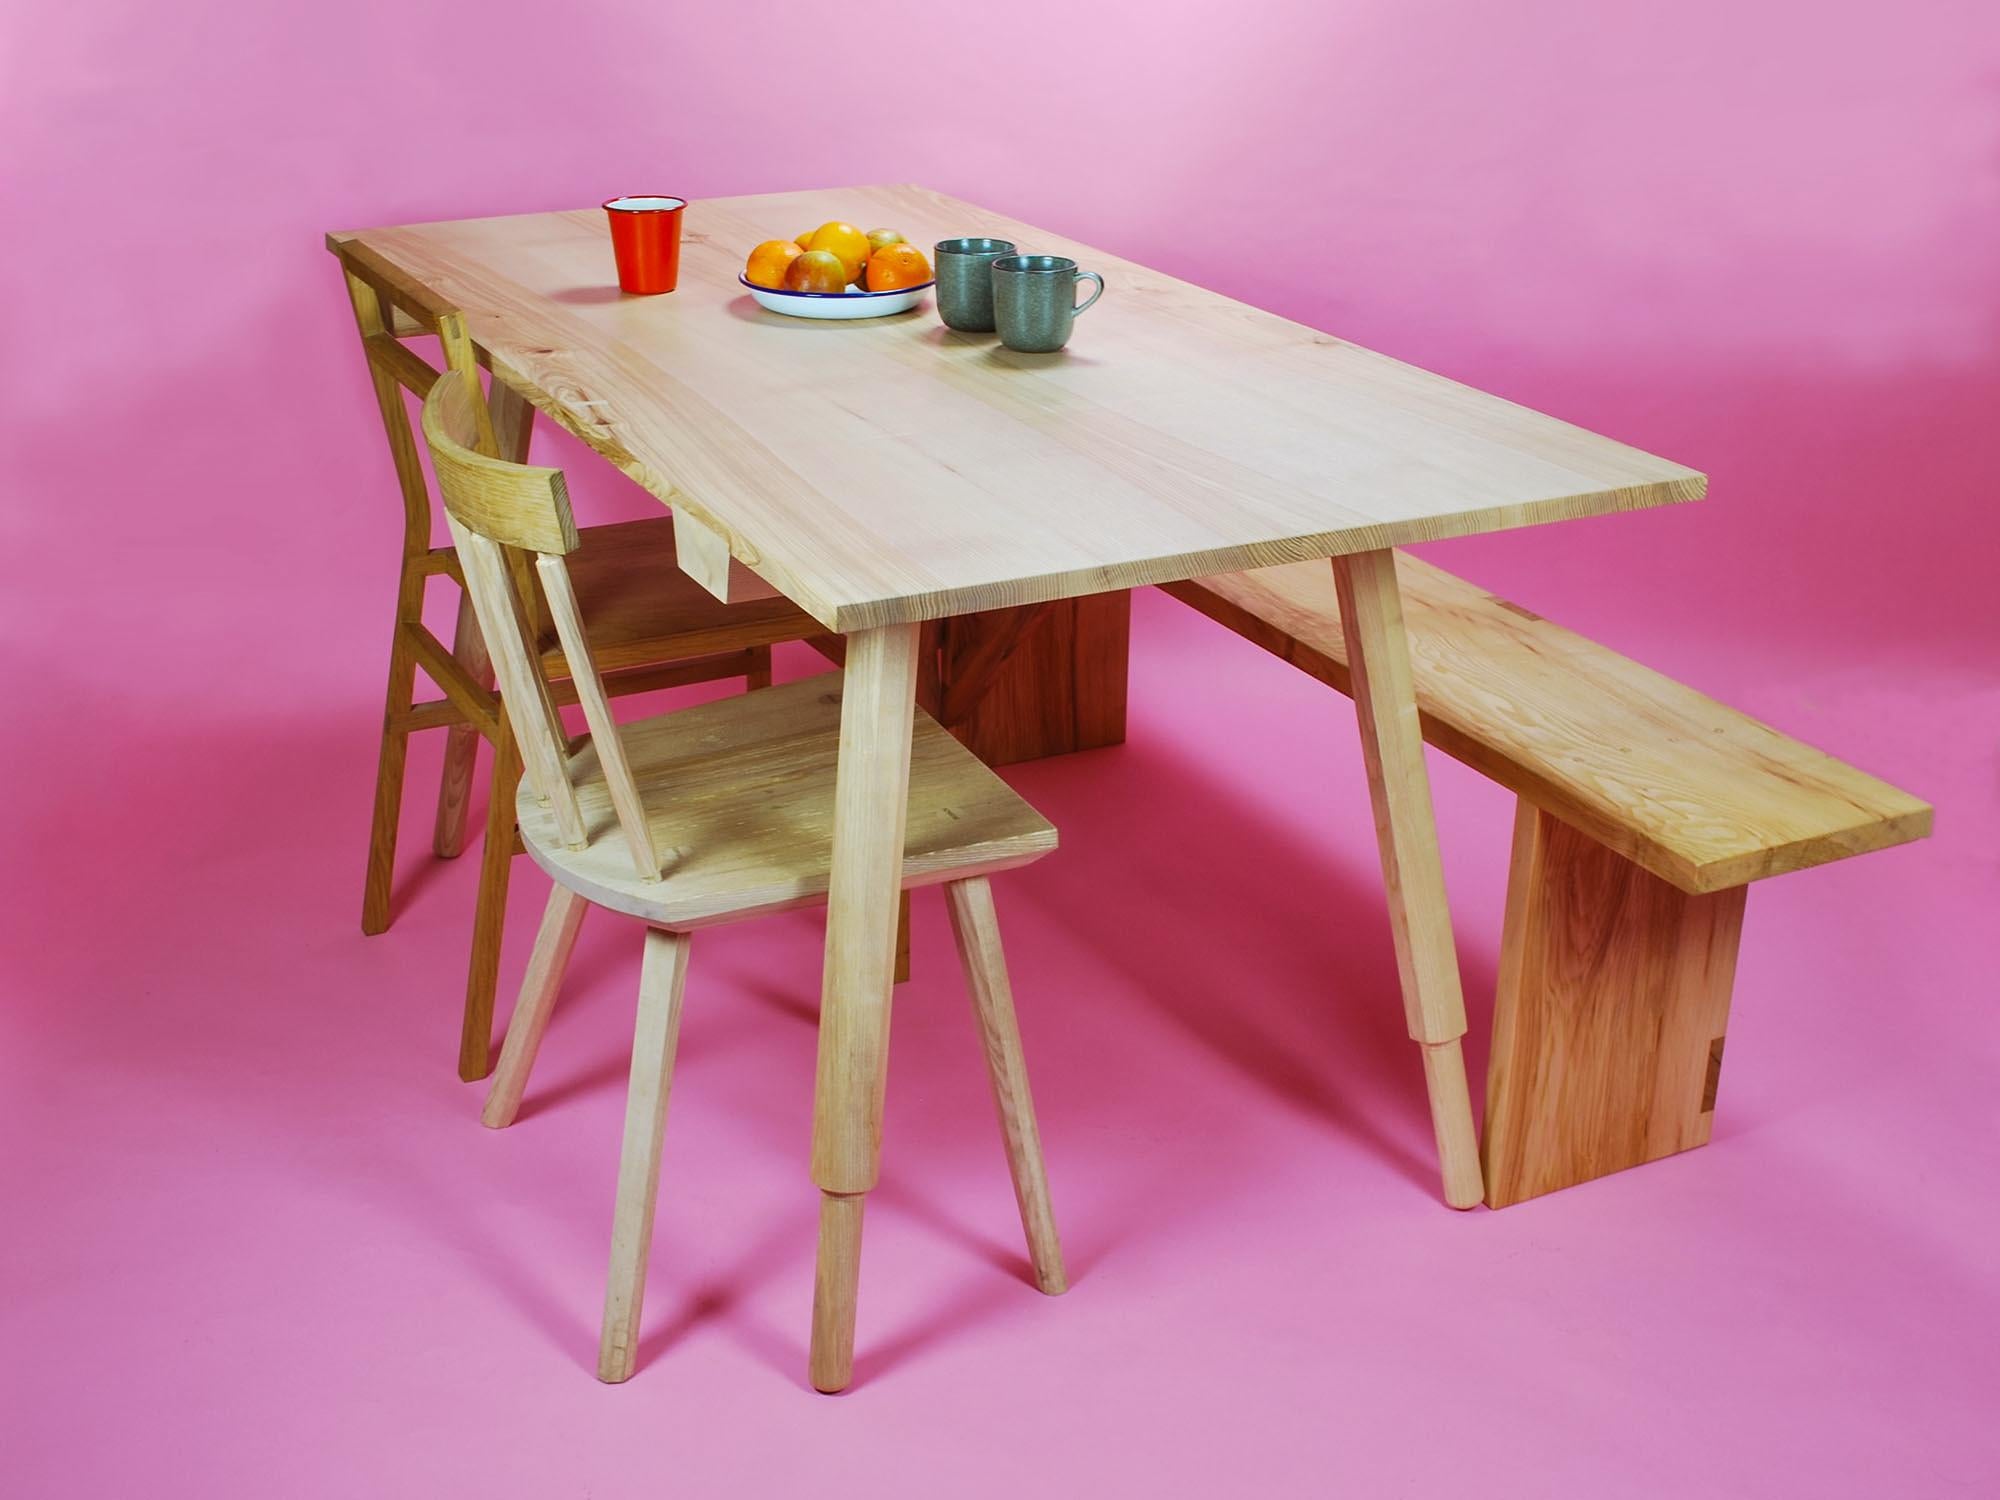 Dining Table, Solid Ash with Screw in Legs, Design by Loose Fit, UK In New Condition For Sale In Bexhill-on-Sea East Sussex, GB